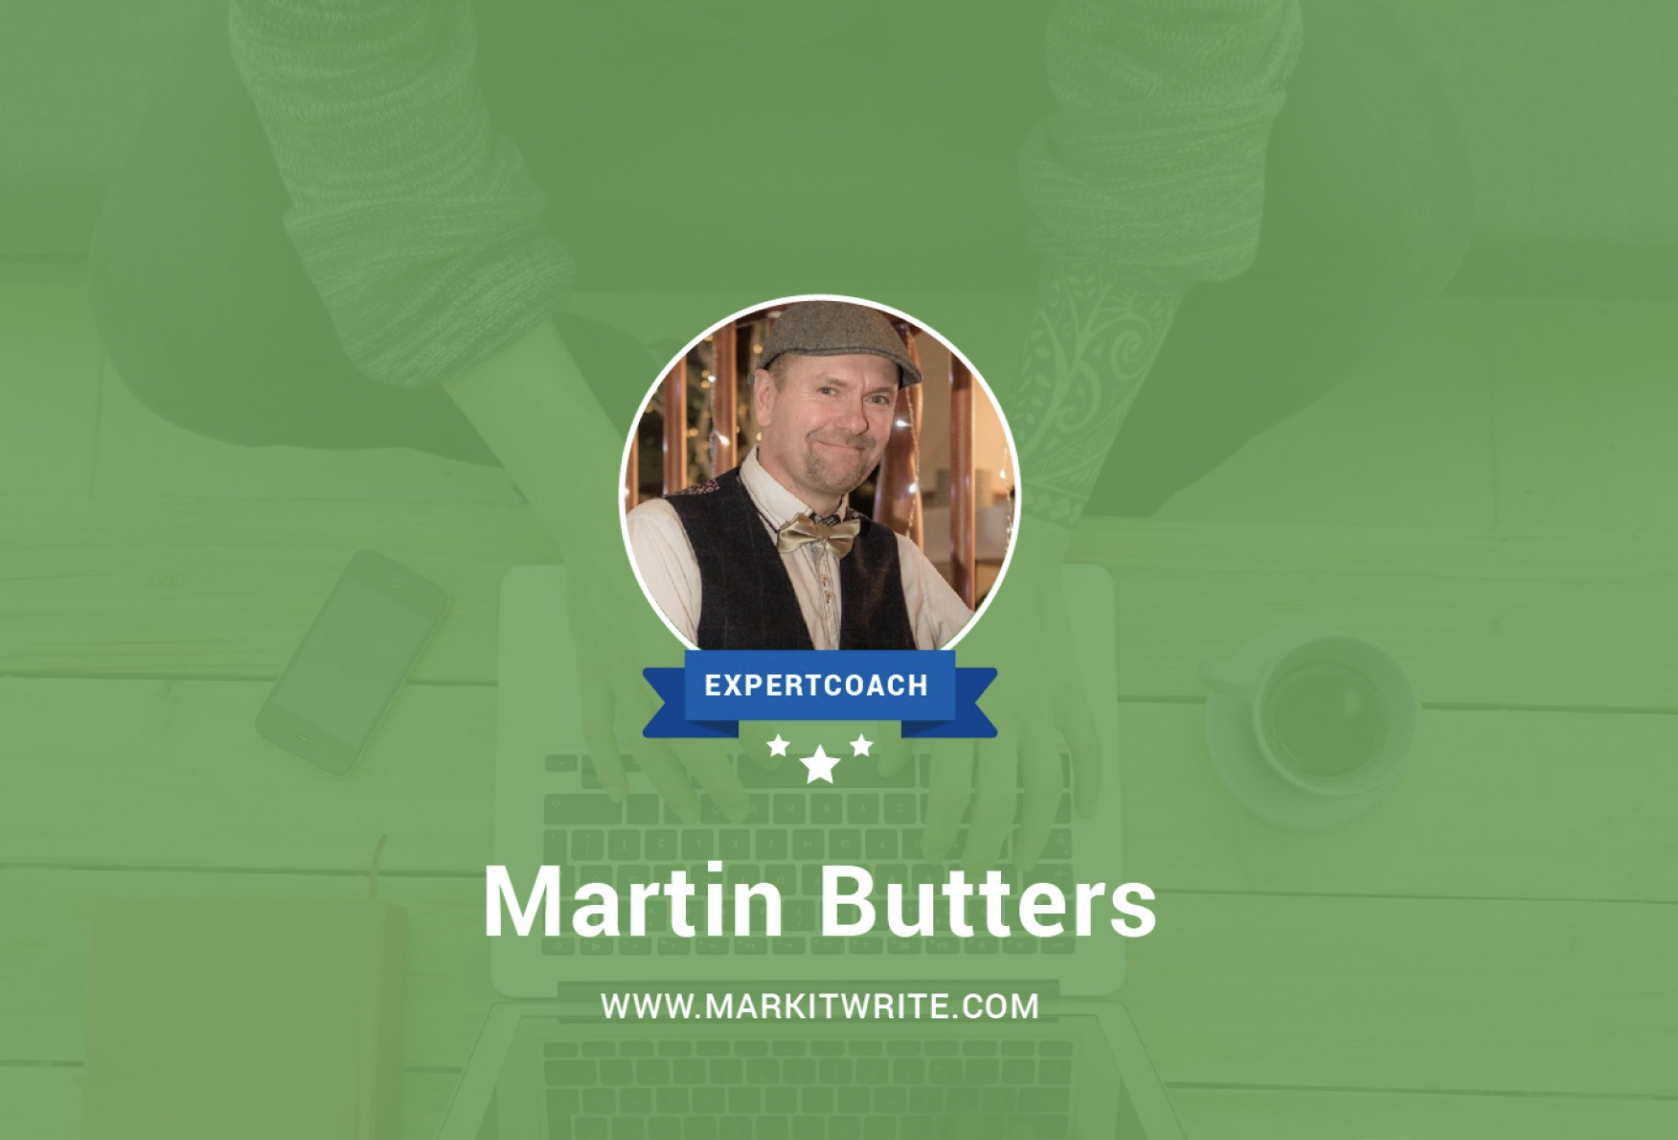 Martin Butters - How Can Small Businesses Get The Most Out of Digital Marketing?